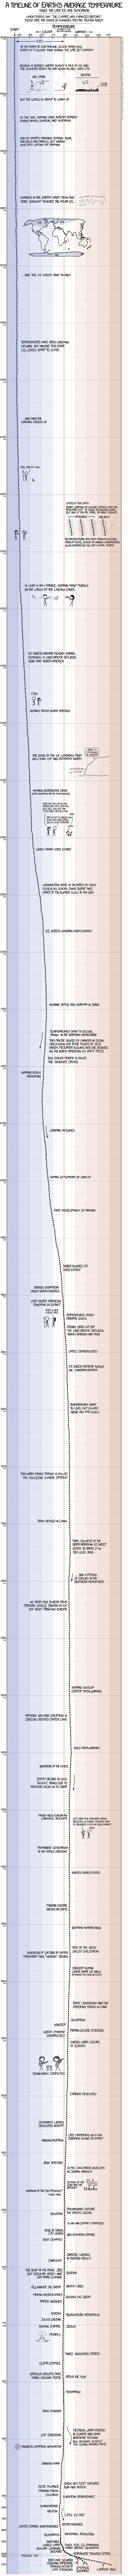 Earth's Temperature Over 22,000 Years